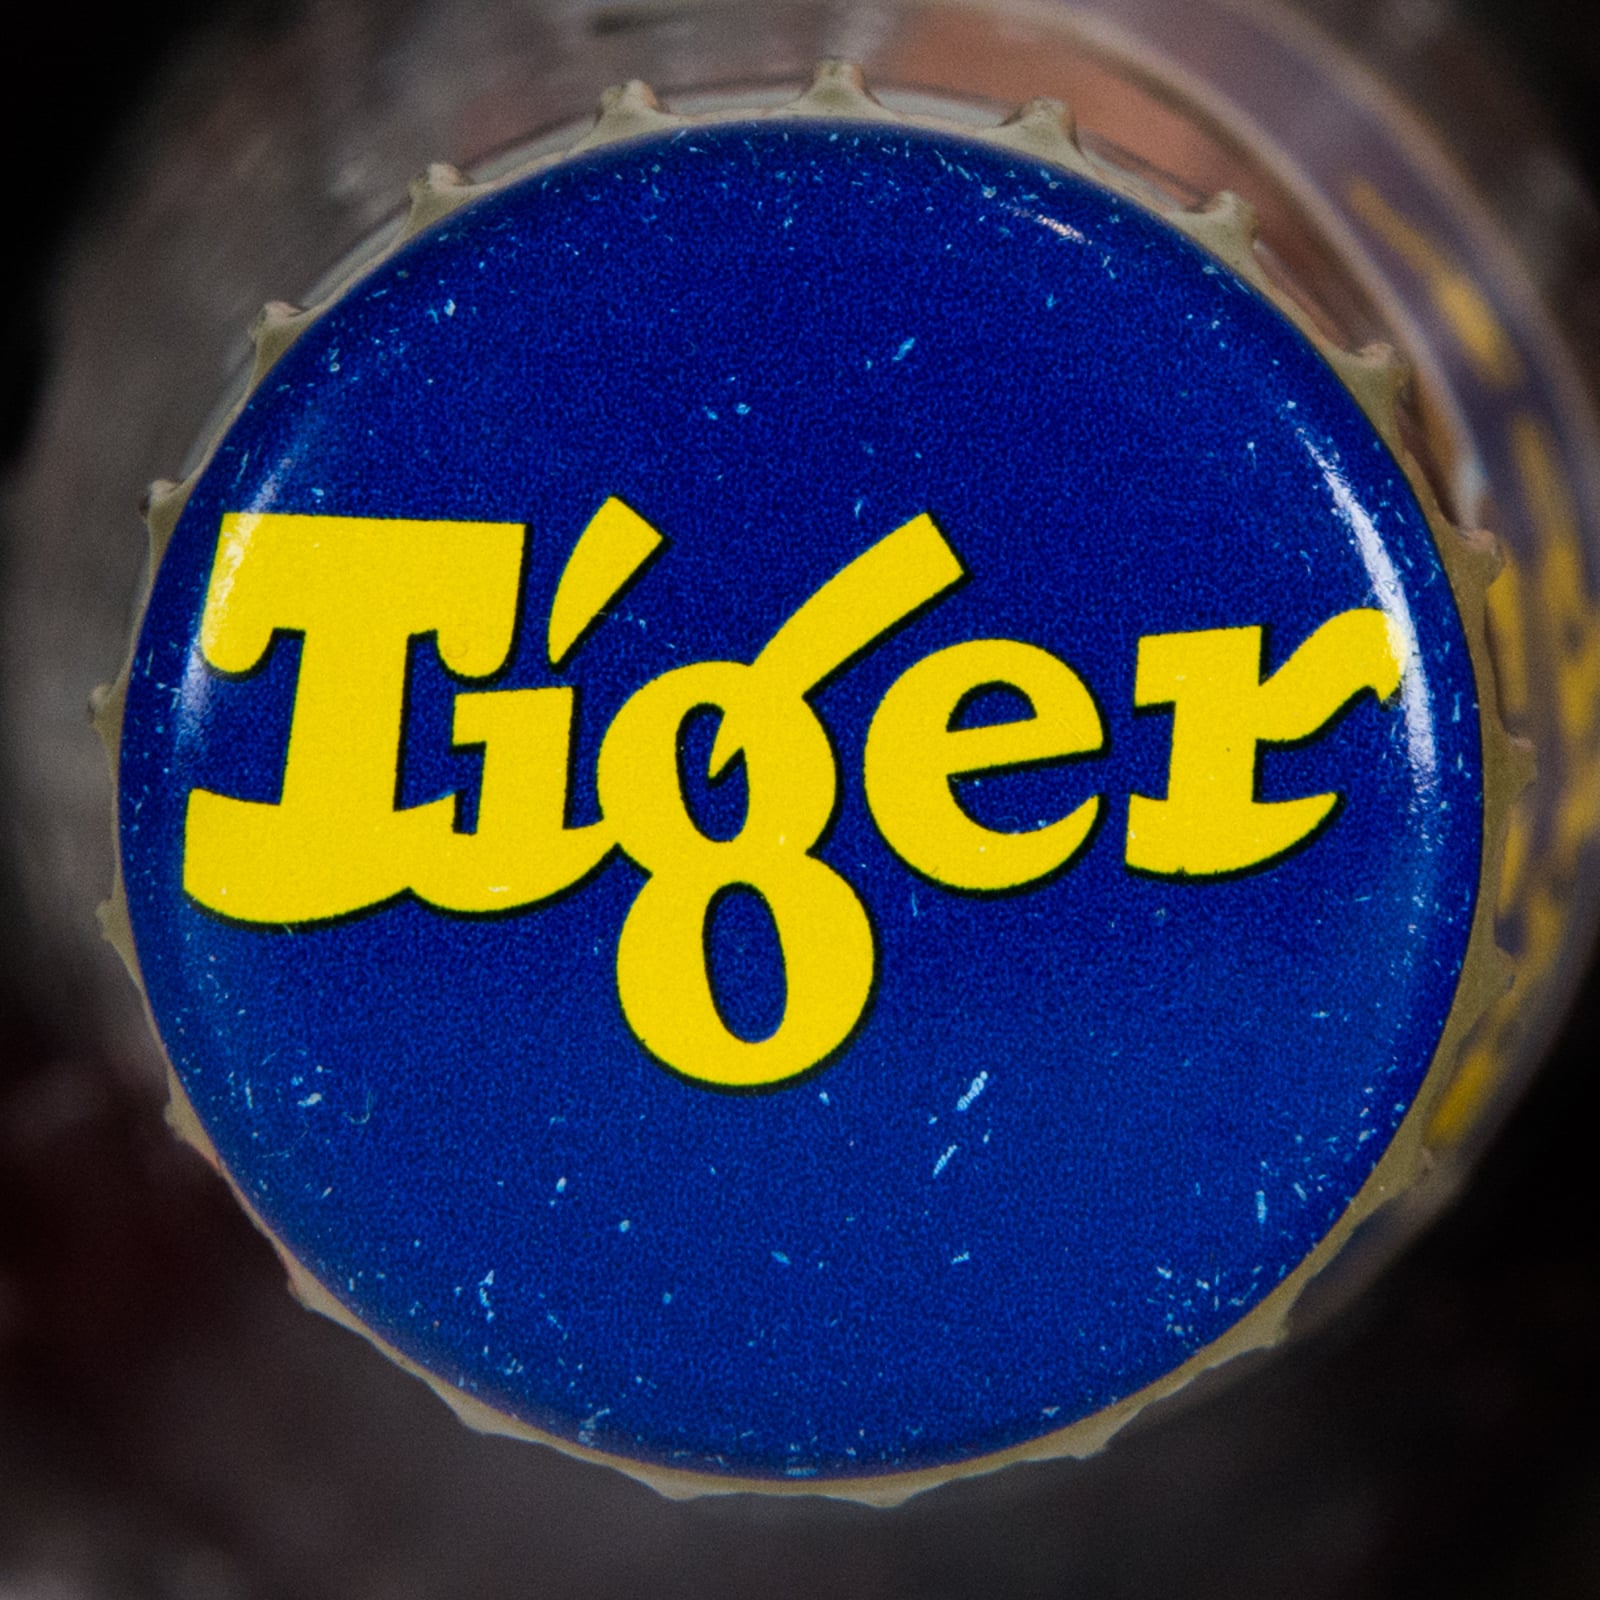 Tiger Limited Edition Replica of 1965 Vintage Bottle, 330 ml